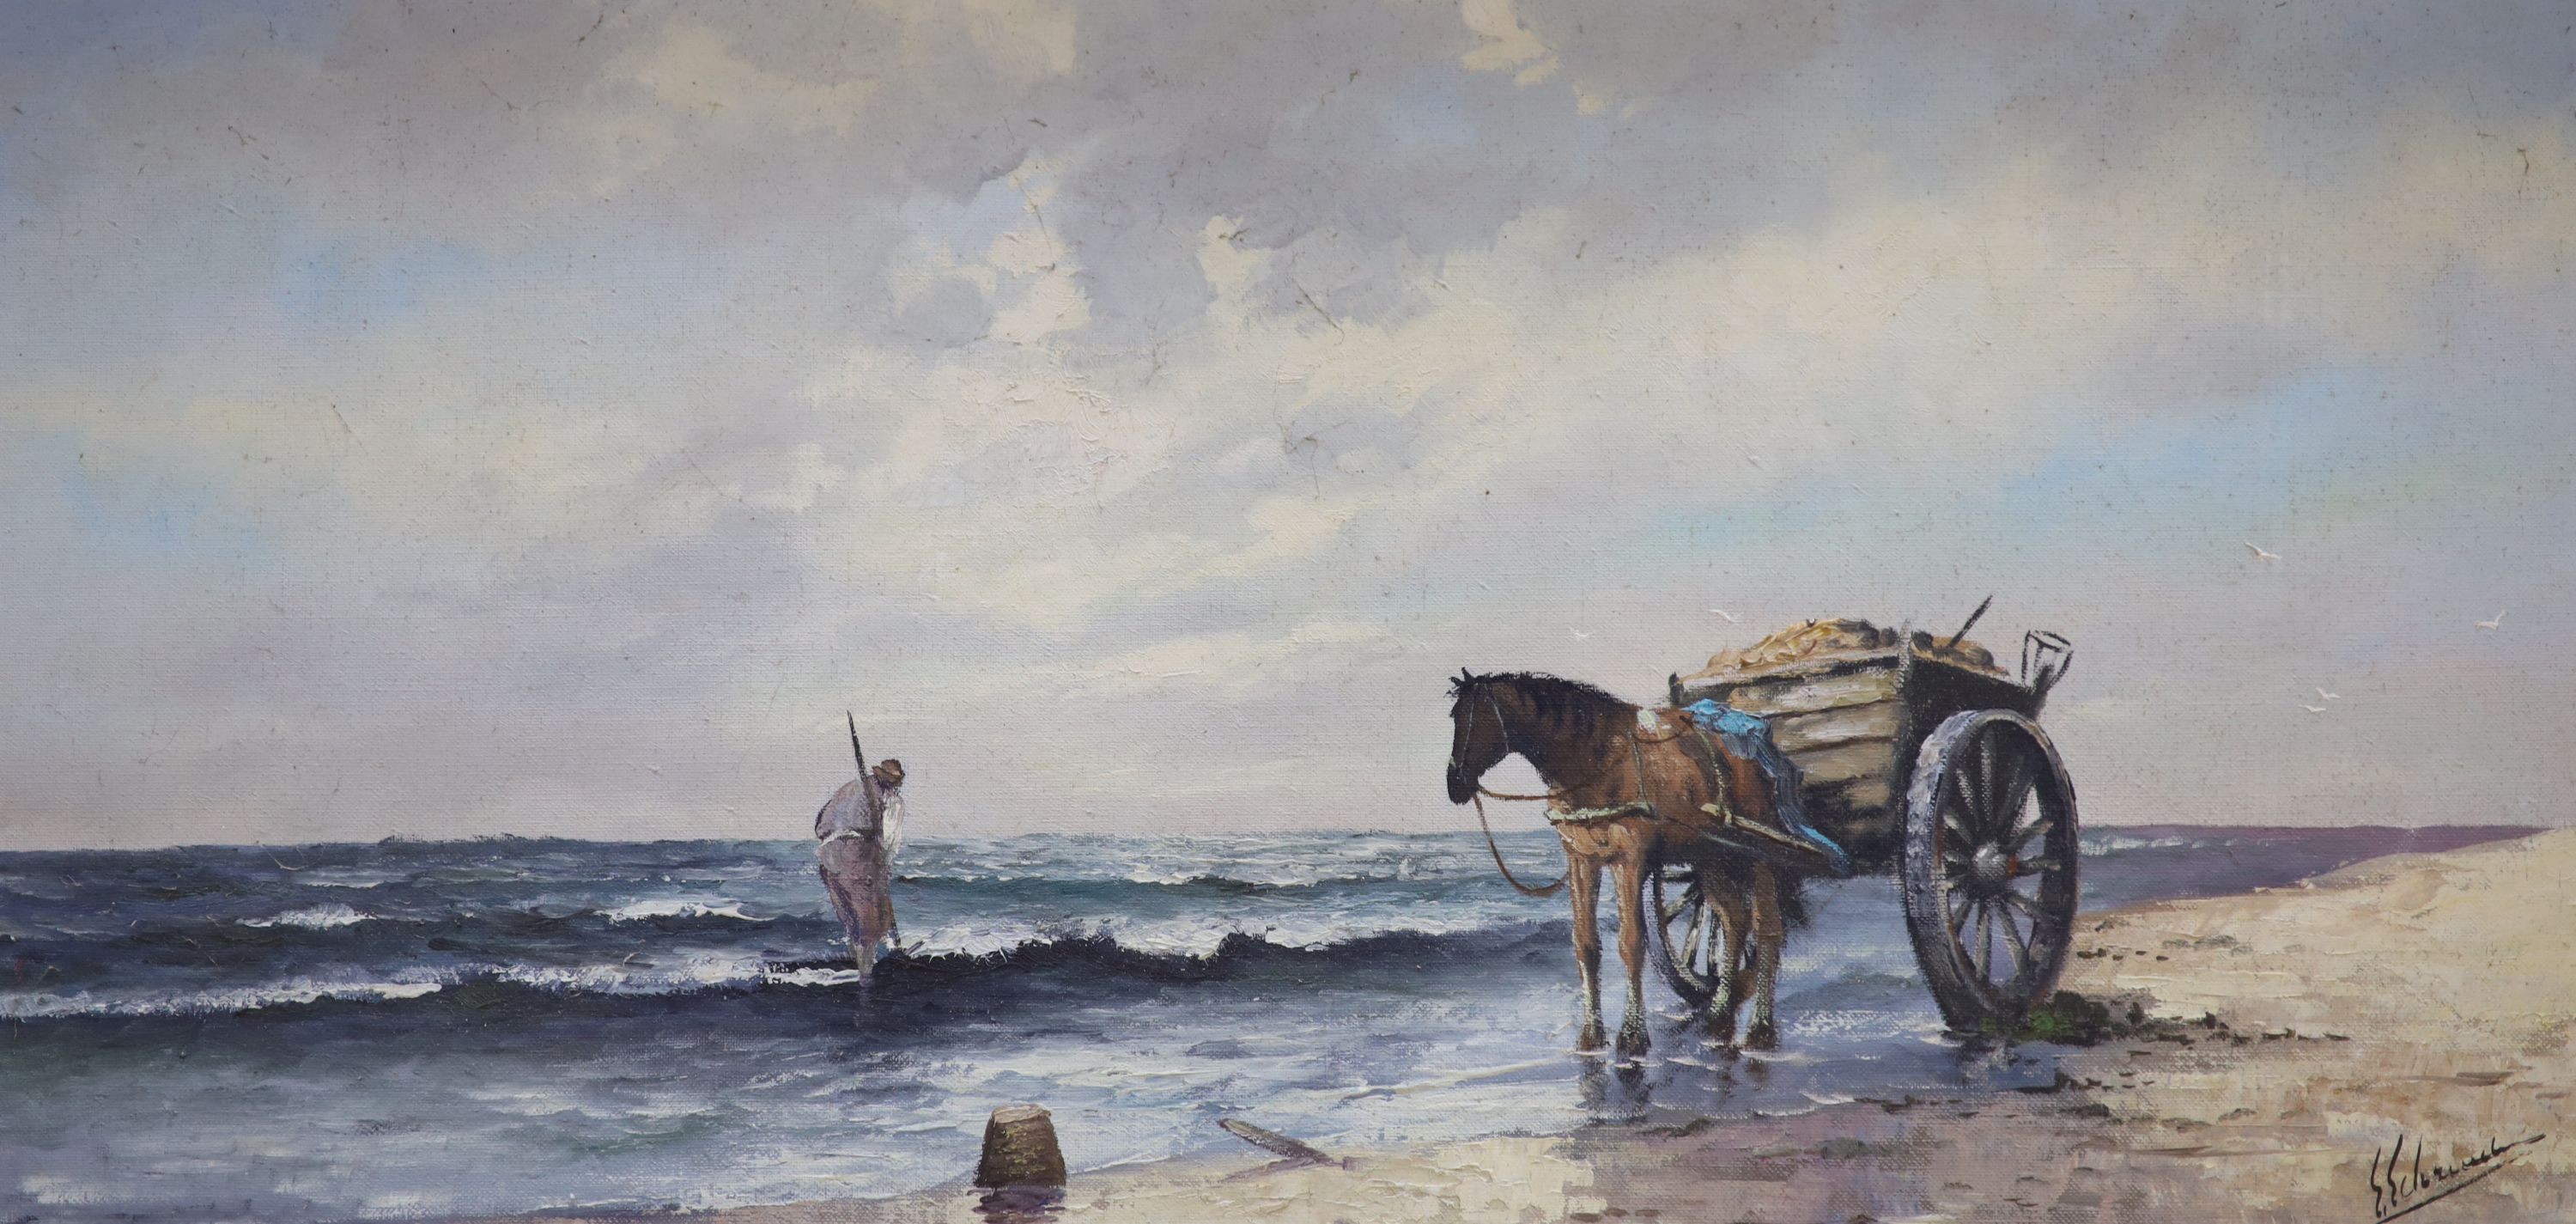 Continental School, oil on canvas, Seaweed gatherer on the shore, indistinctly signed, 38 x 78cm, together with an oil still life of flowers, 60 x 50cm